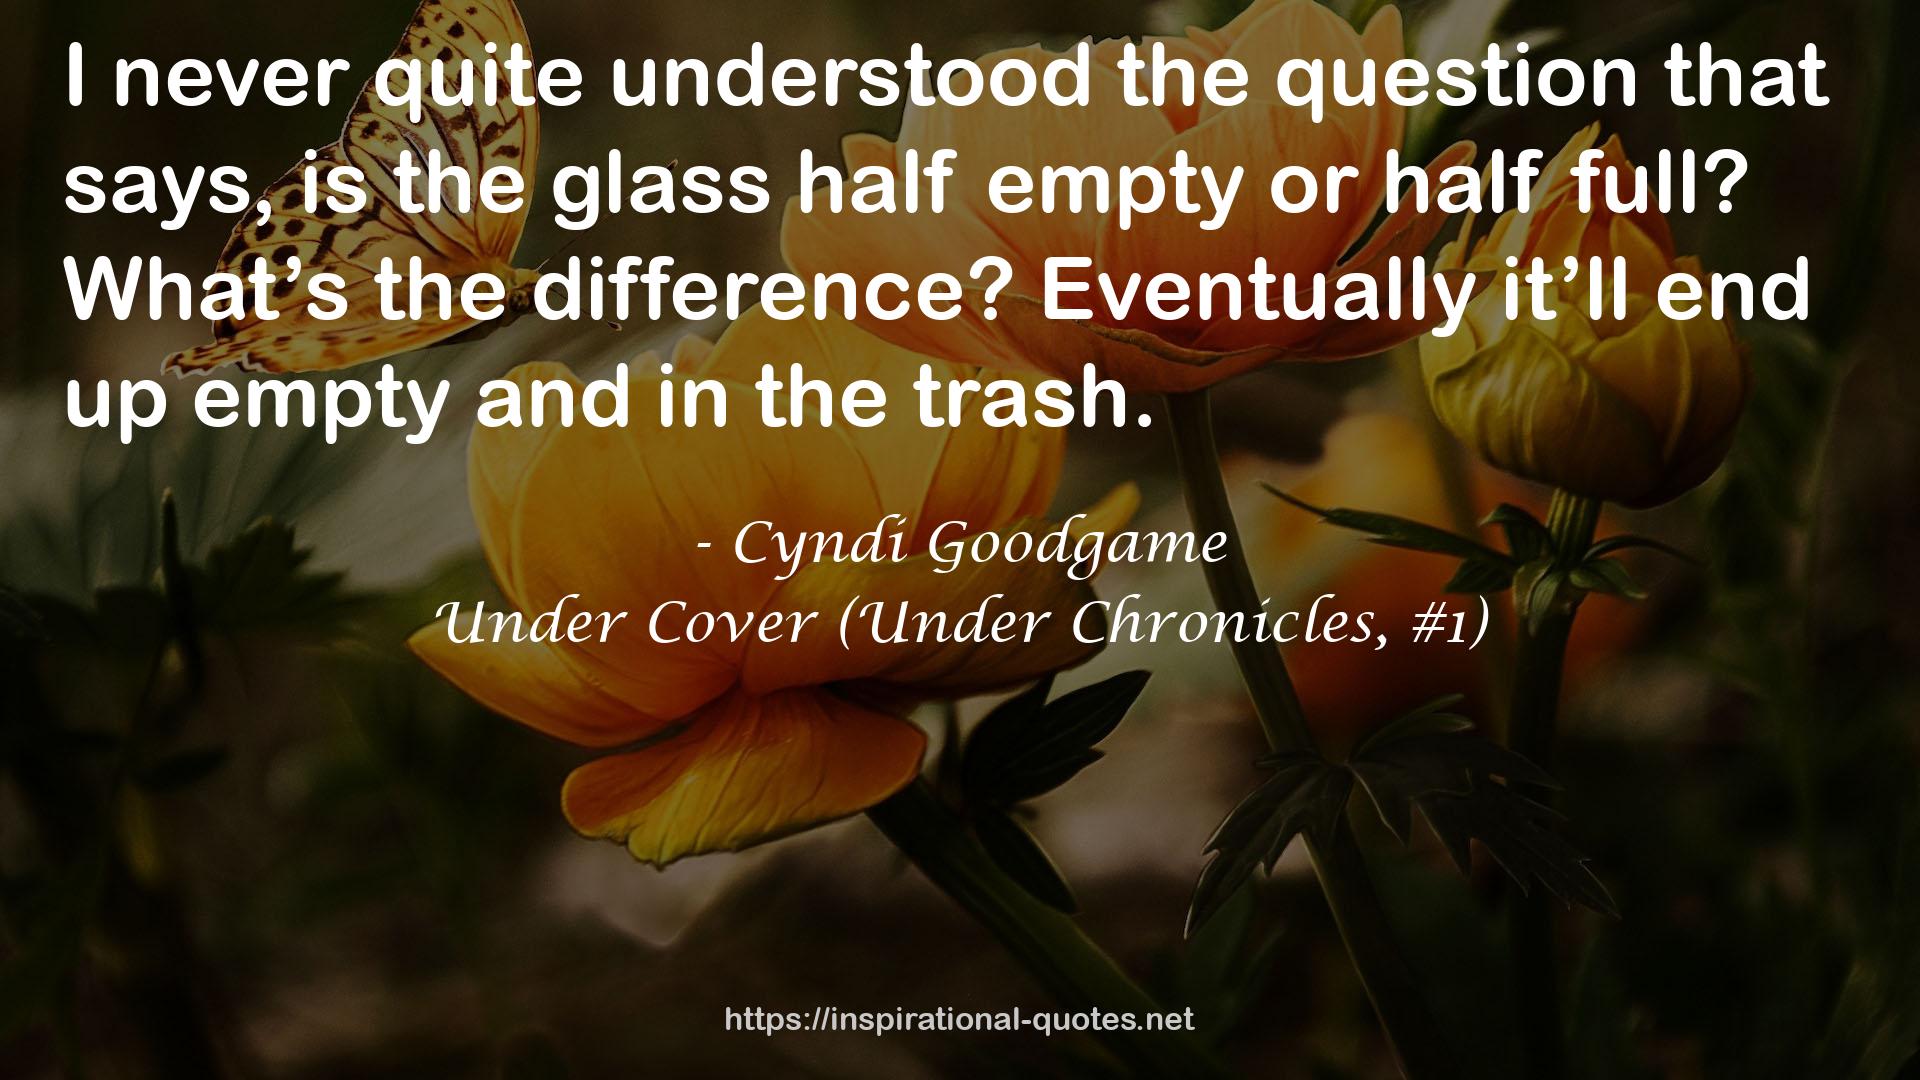 Under Cover (Under Chronicles, #1) QUOTES